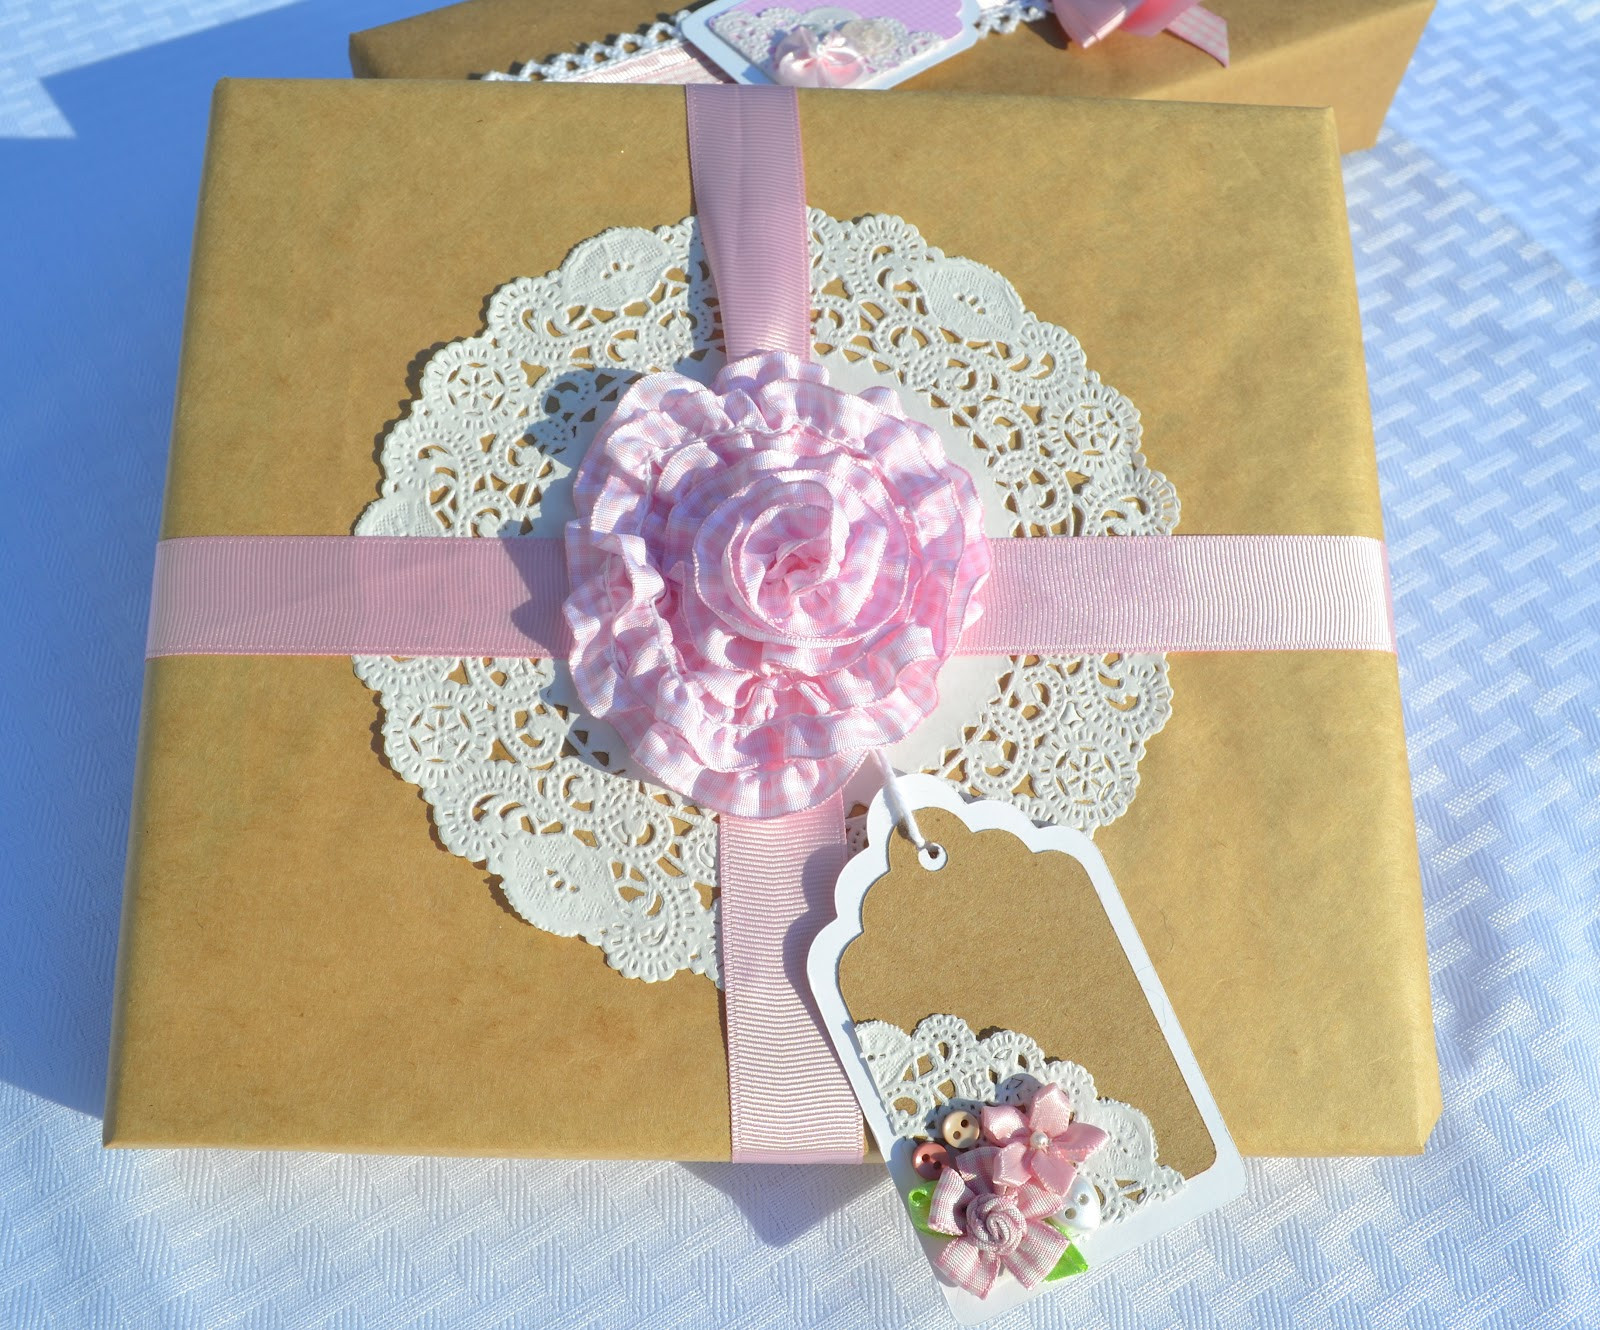 Gift Wrapping Ideas For Baby Boy
 Corner of Plaid and Paisley Baby Shower Gift Wrap